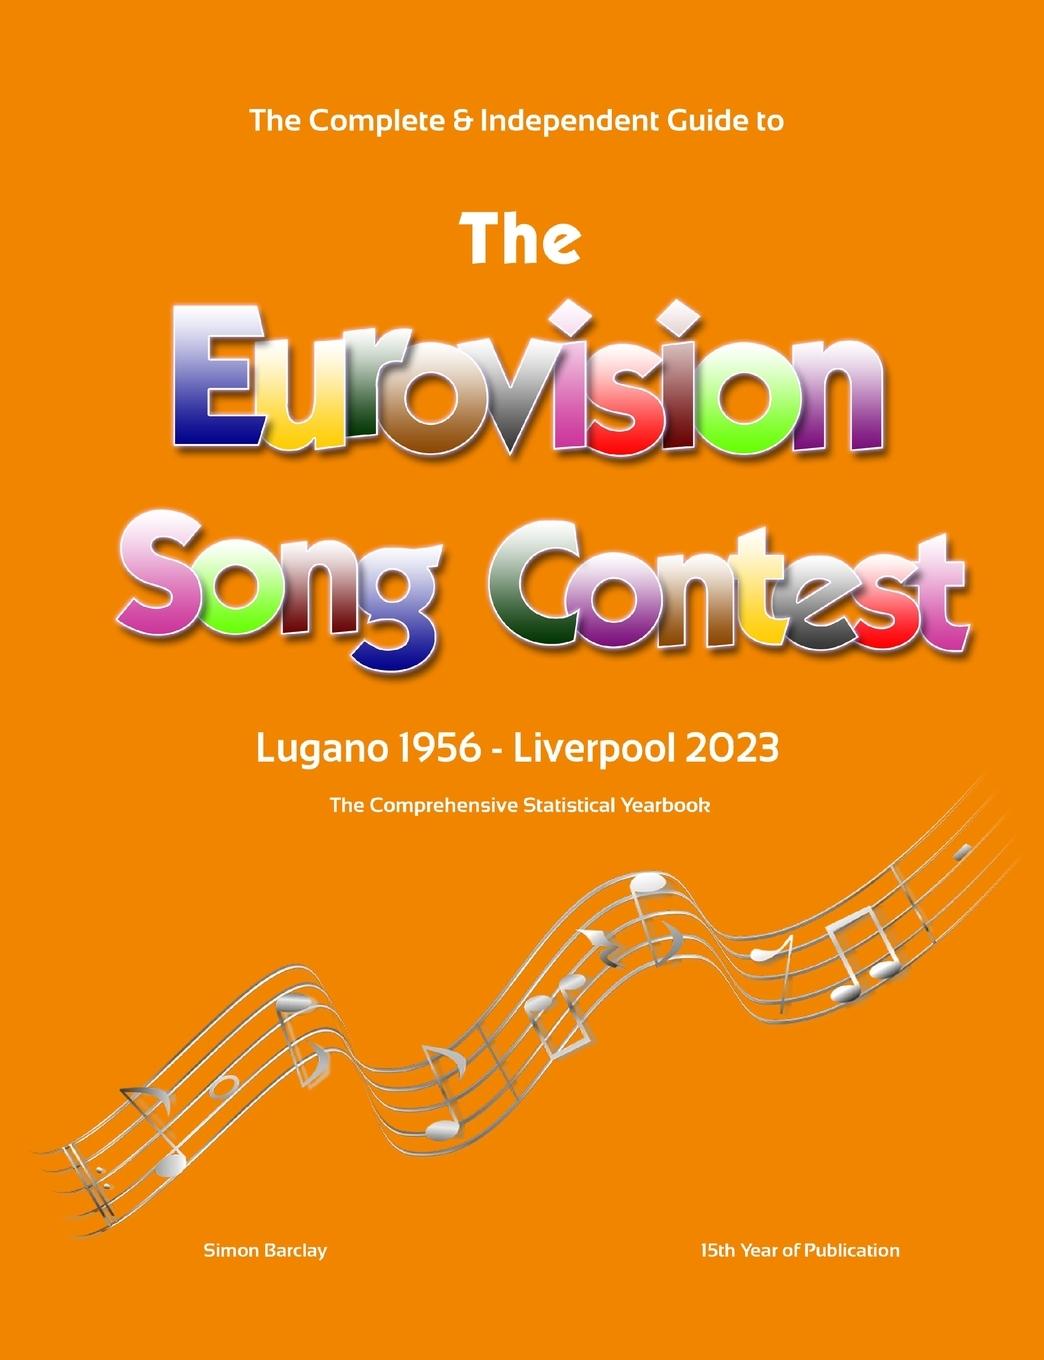 Book The Complete & Independent Guide to the Eurovision Song Contest 2023 